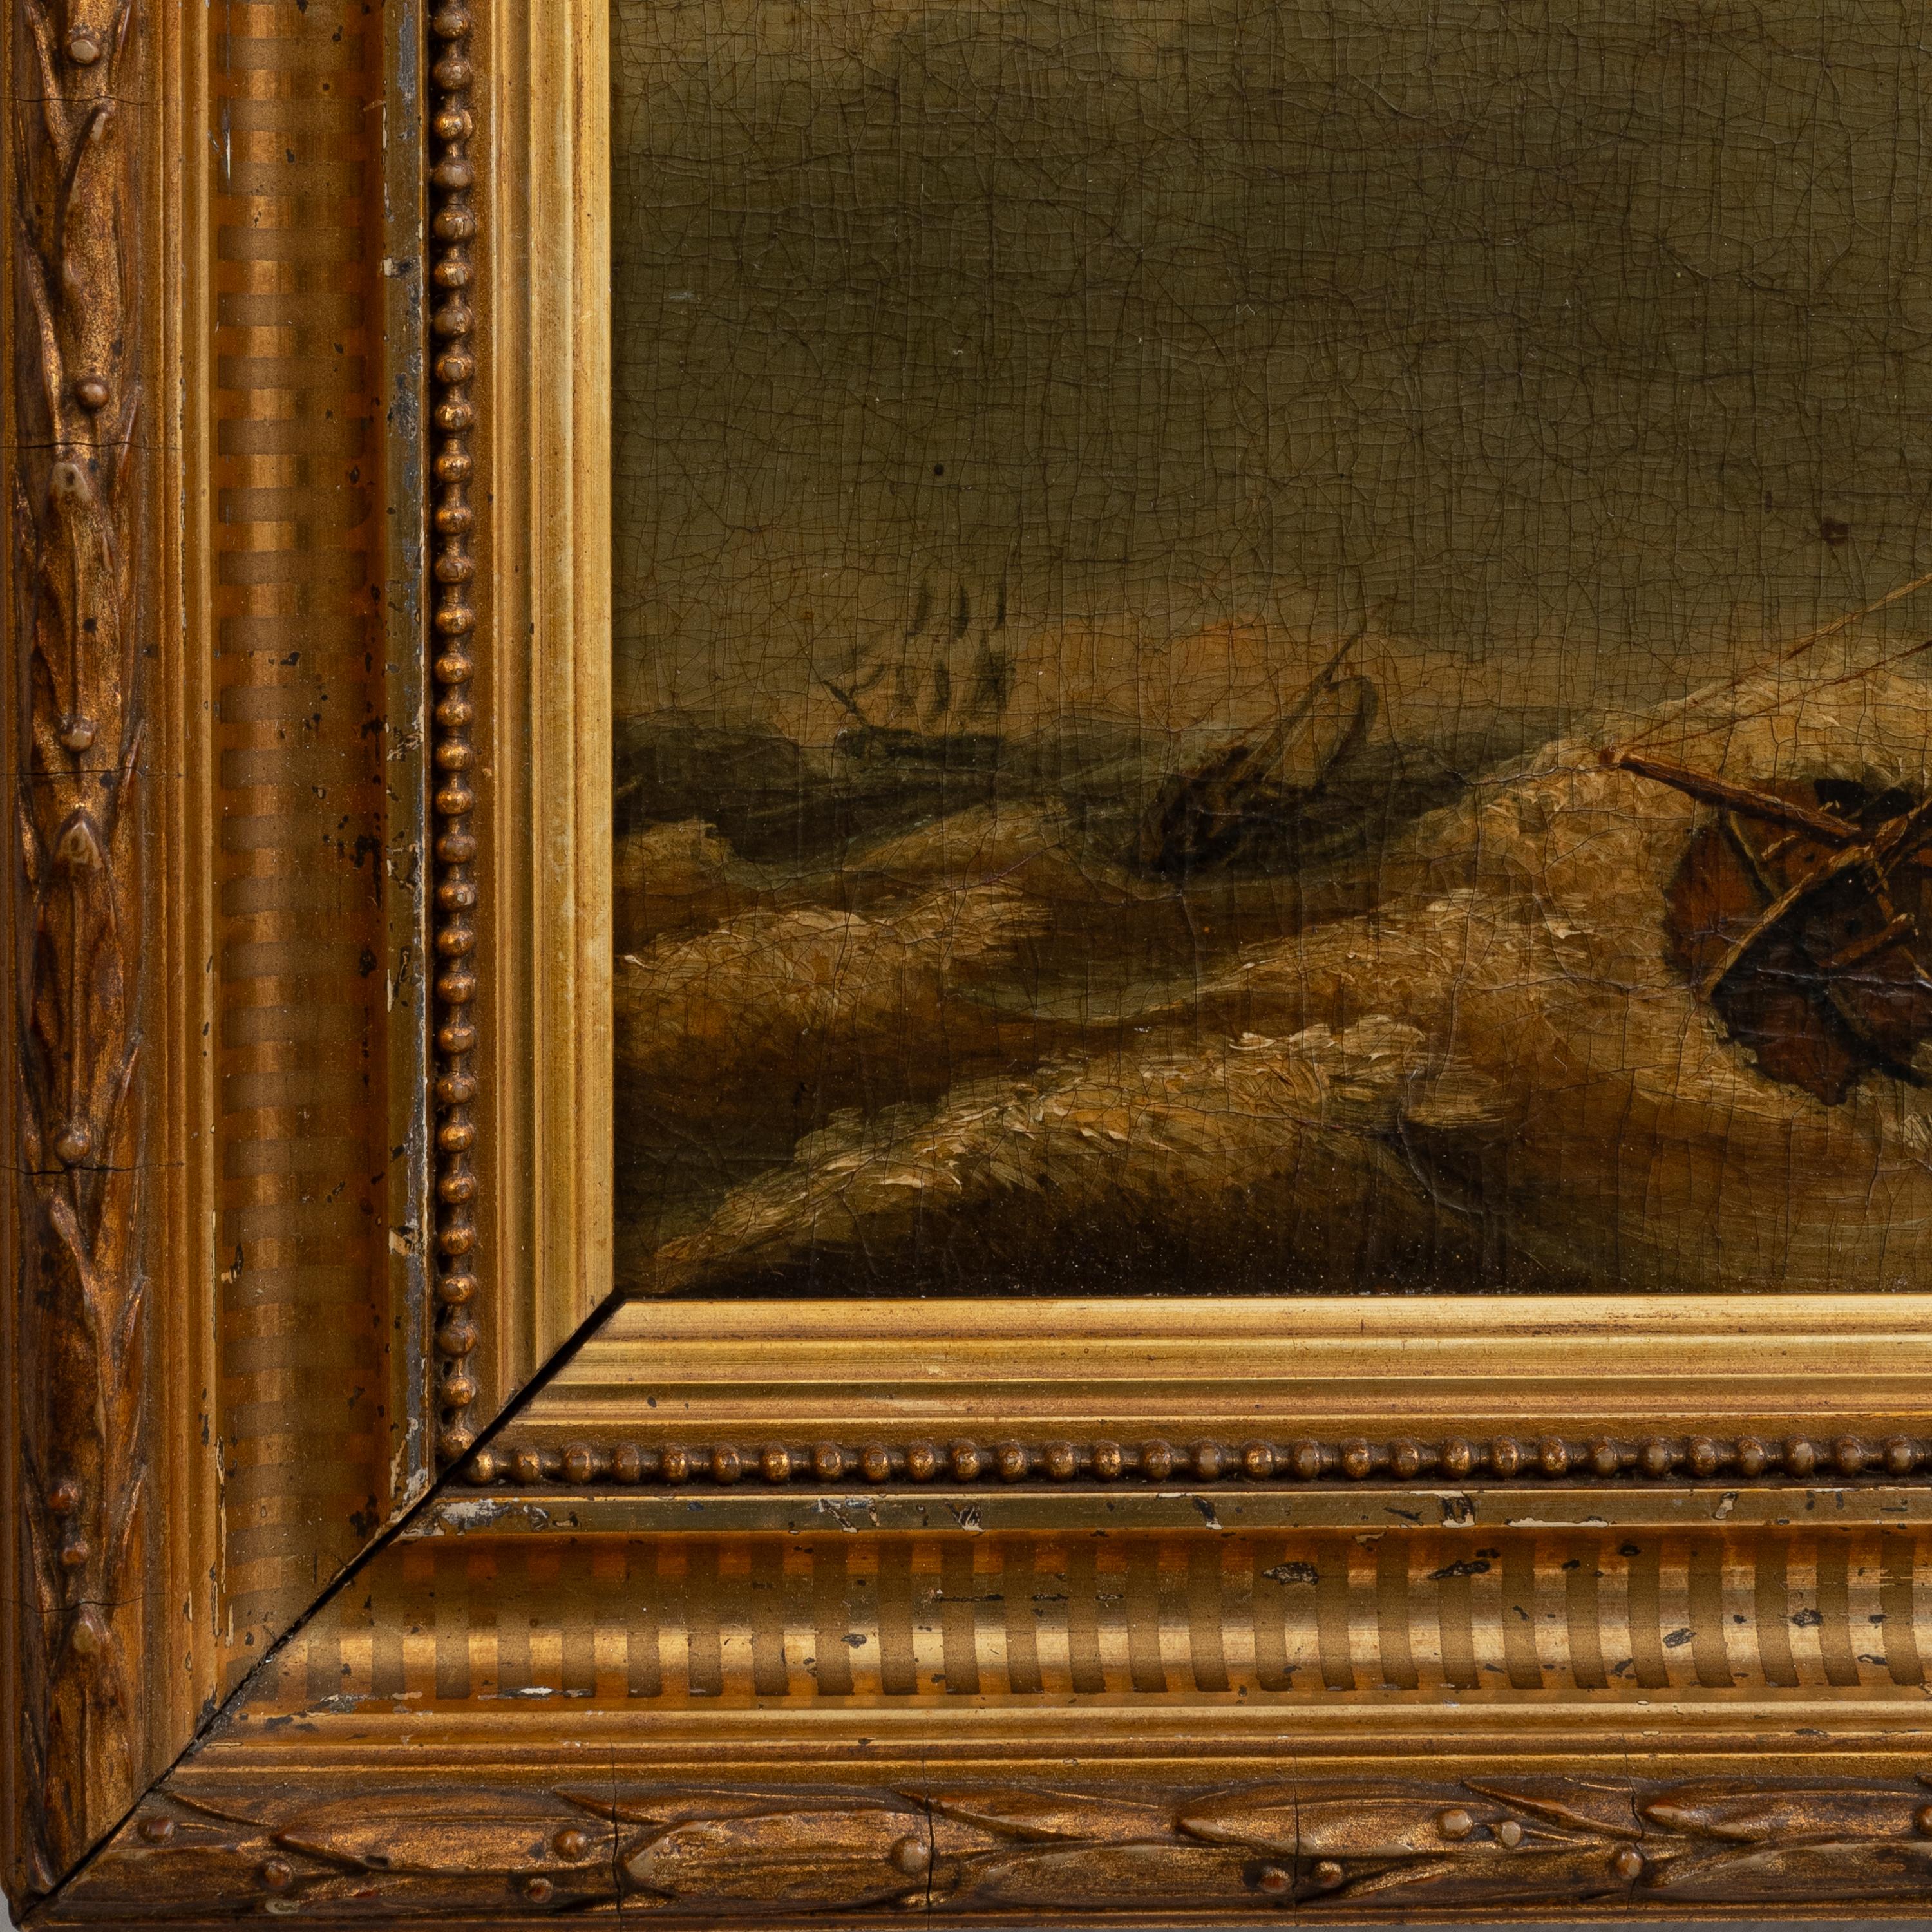 This exquisite 19th-century French painting captures the drama and intensity of a maritime scene, featuring a lone sailboat battling the tumultuous sea. The masterful brushwork vividly portrays the churning waves and windswept skies, creating a